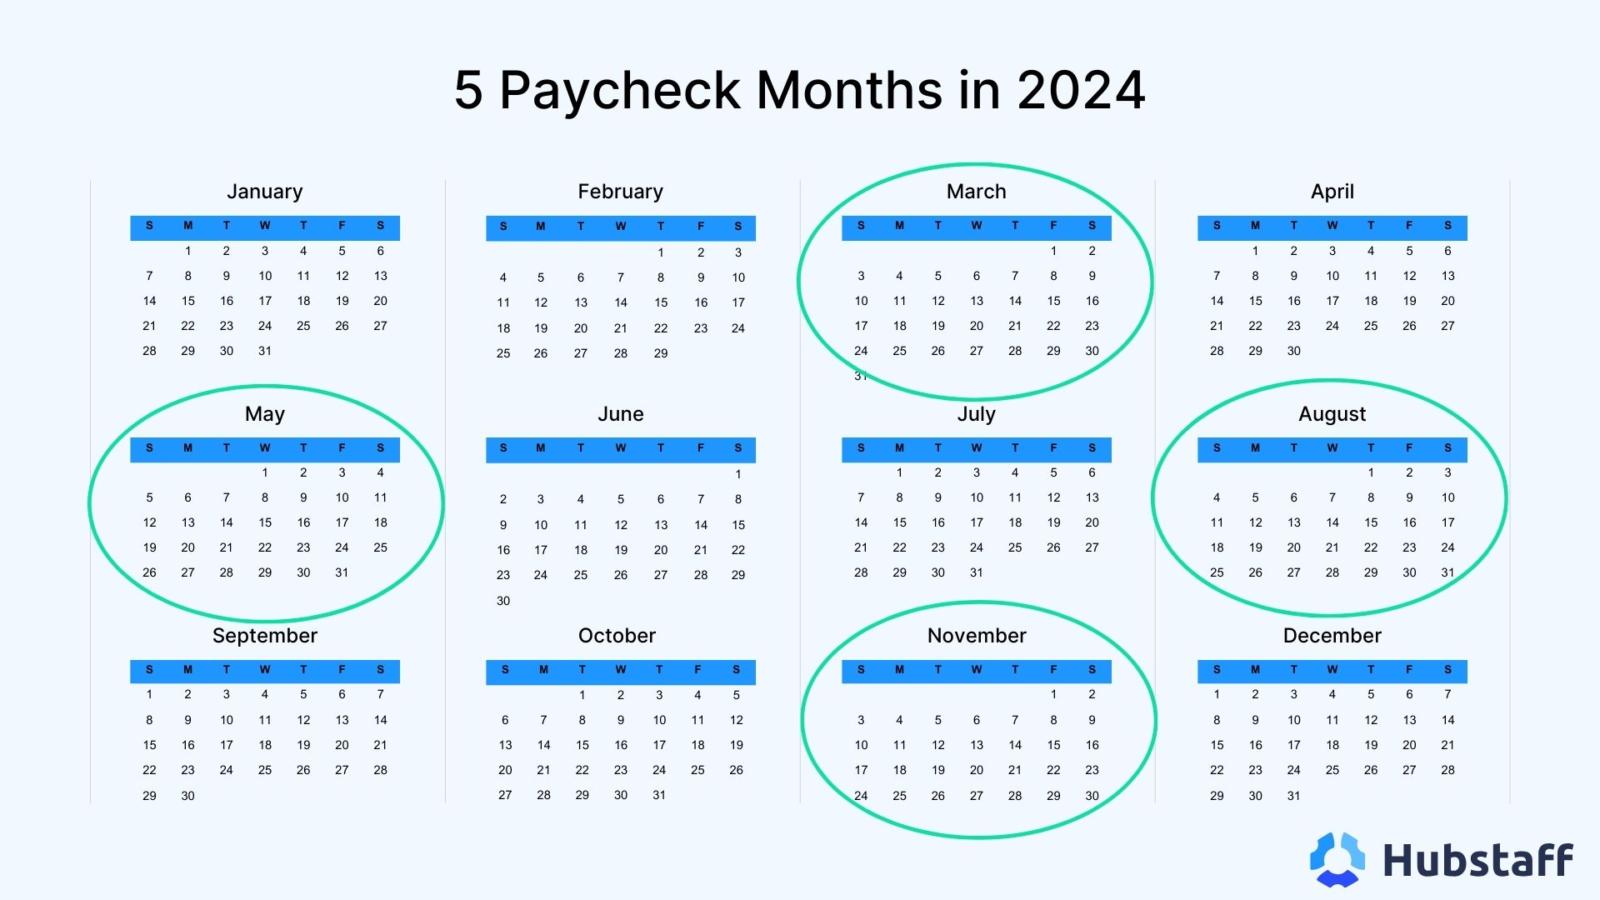 Five paycheck months in 2024